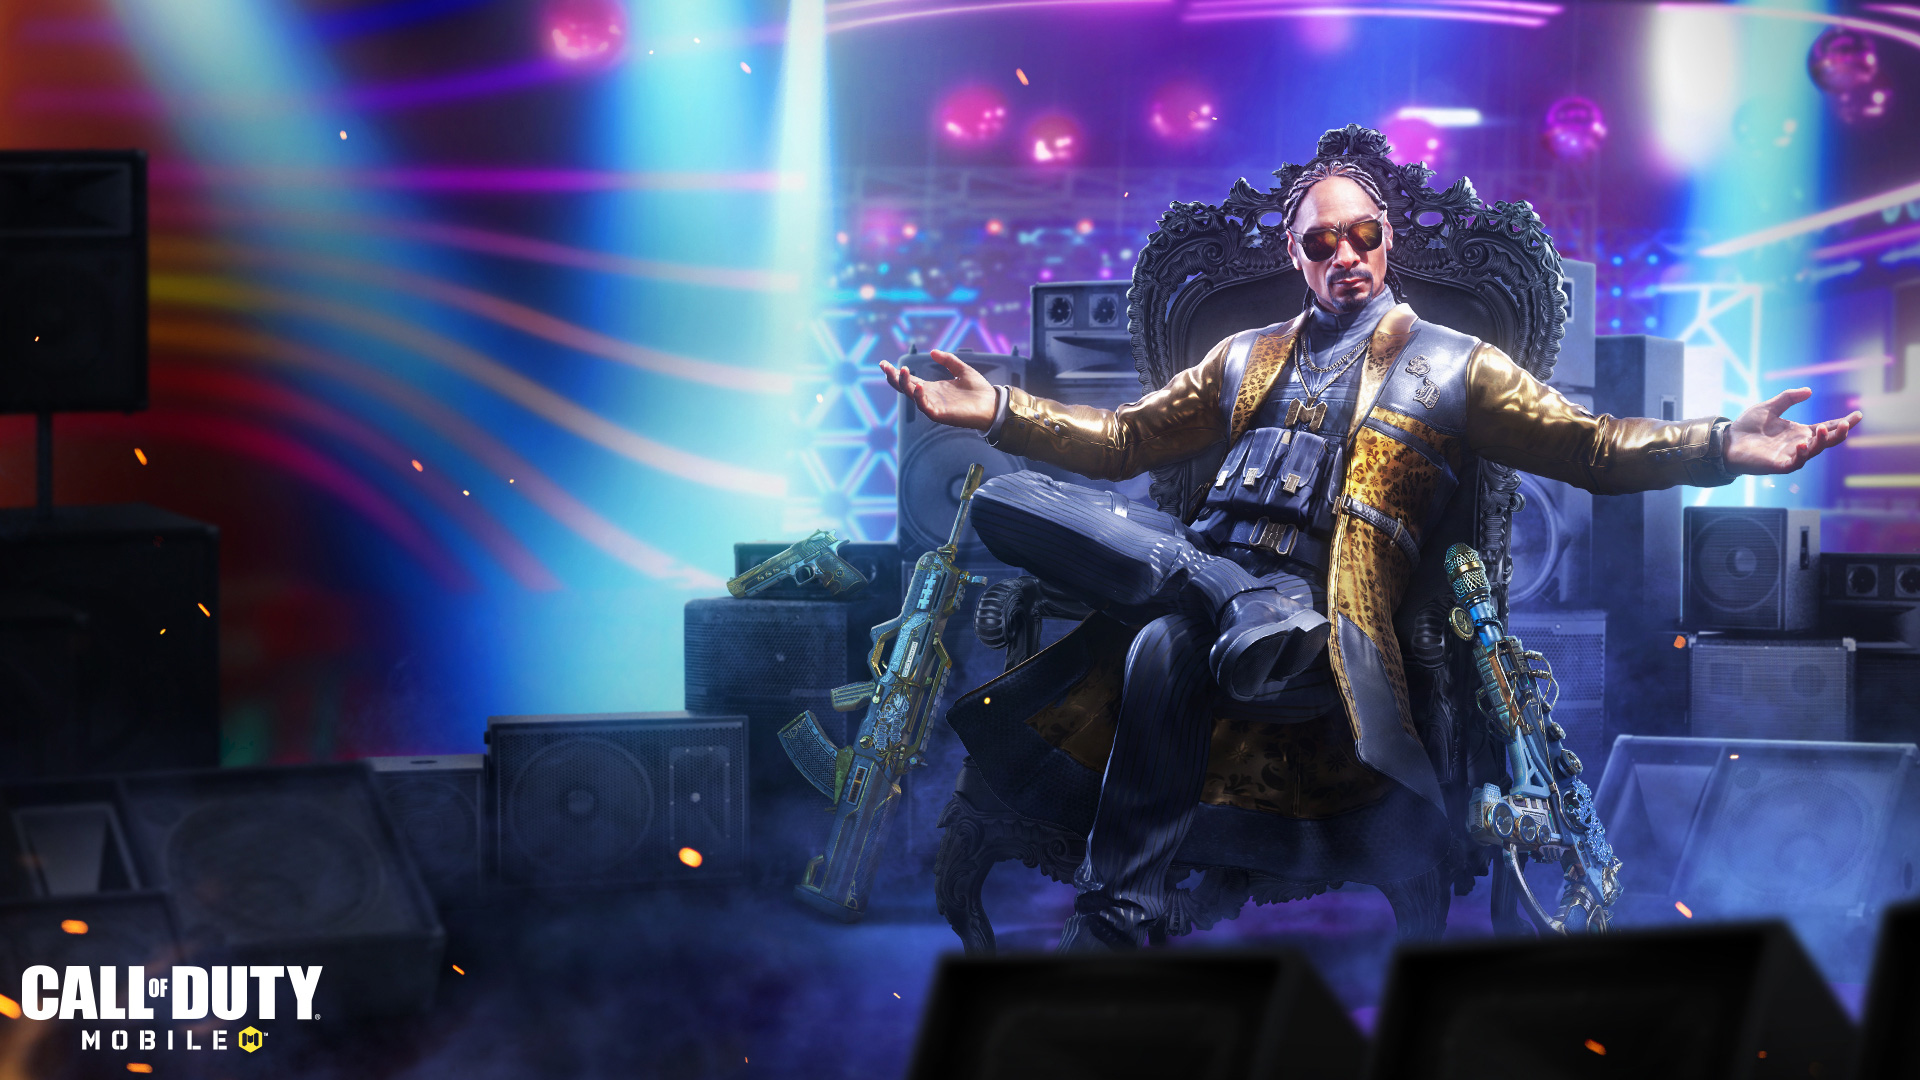 Snoop Dogg to be Playable Operator in Call of Duty screenshot 1